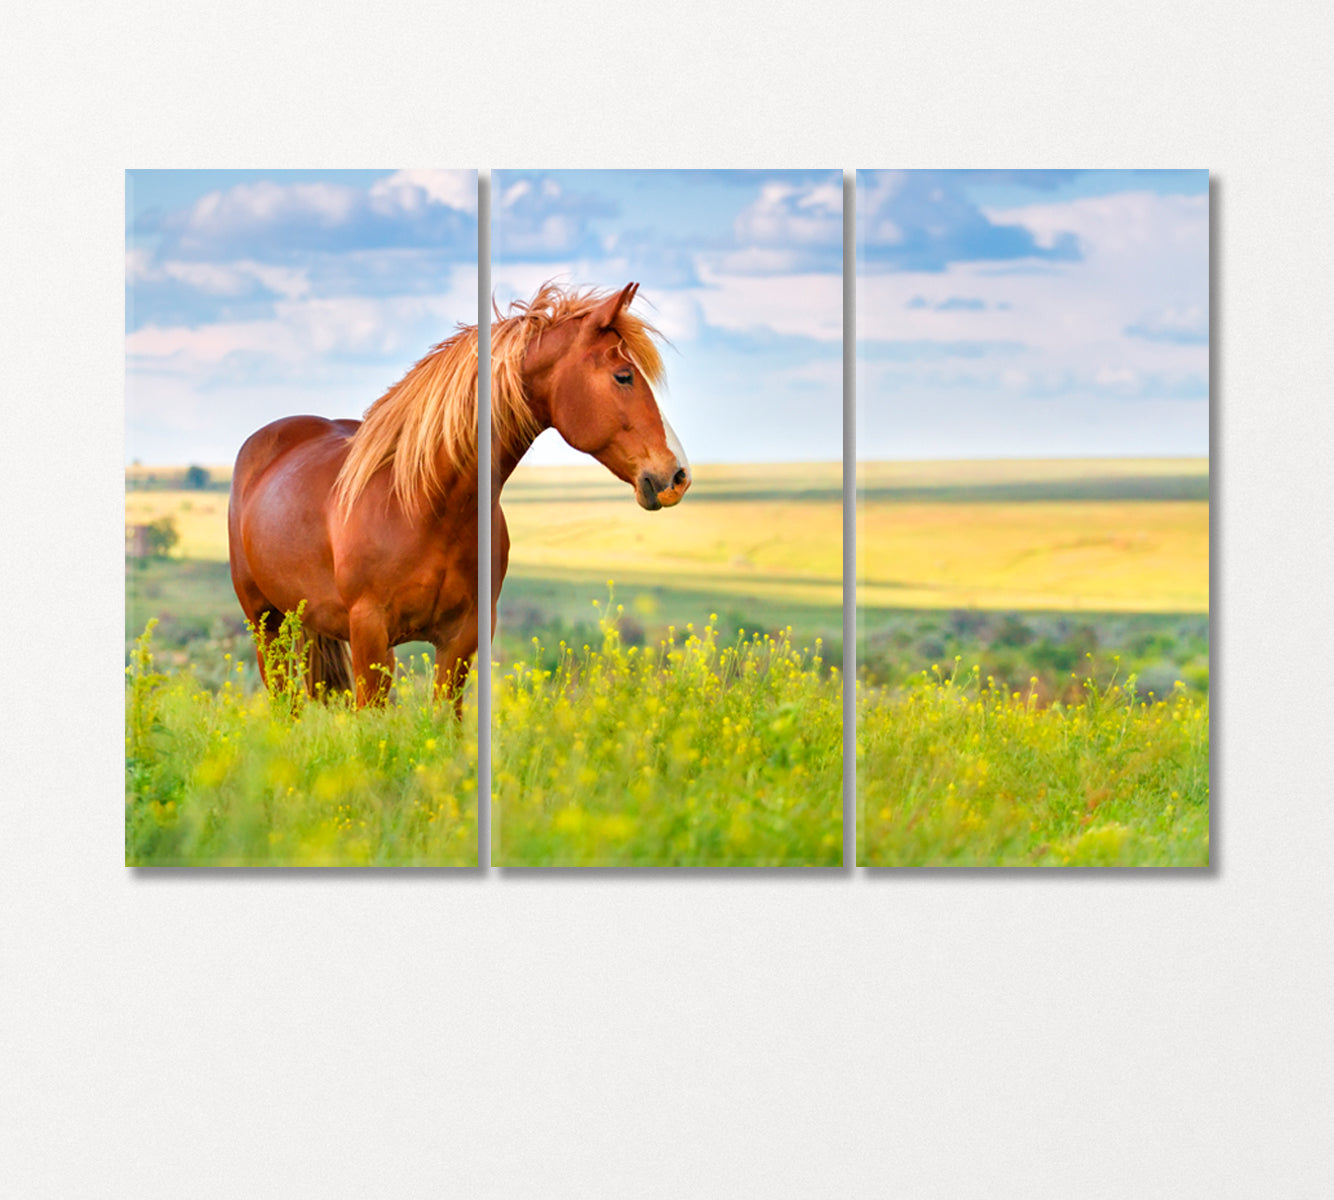 Red Horse in Flower Field Canvas Print-Canvas Print-CetArt-3 Panels-36x24 inches-CetArt